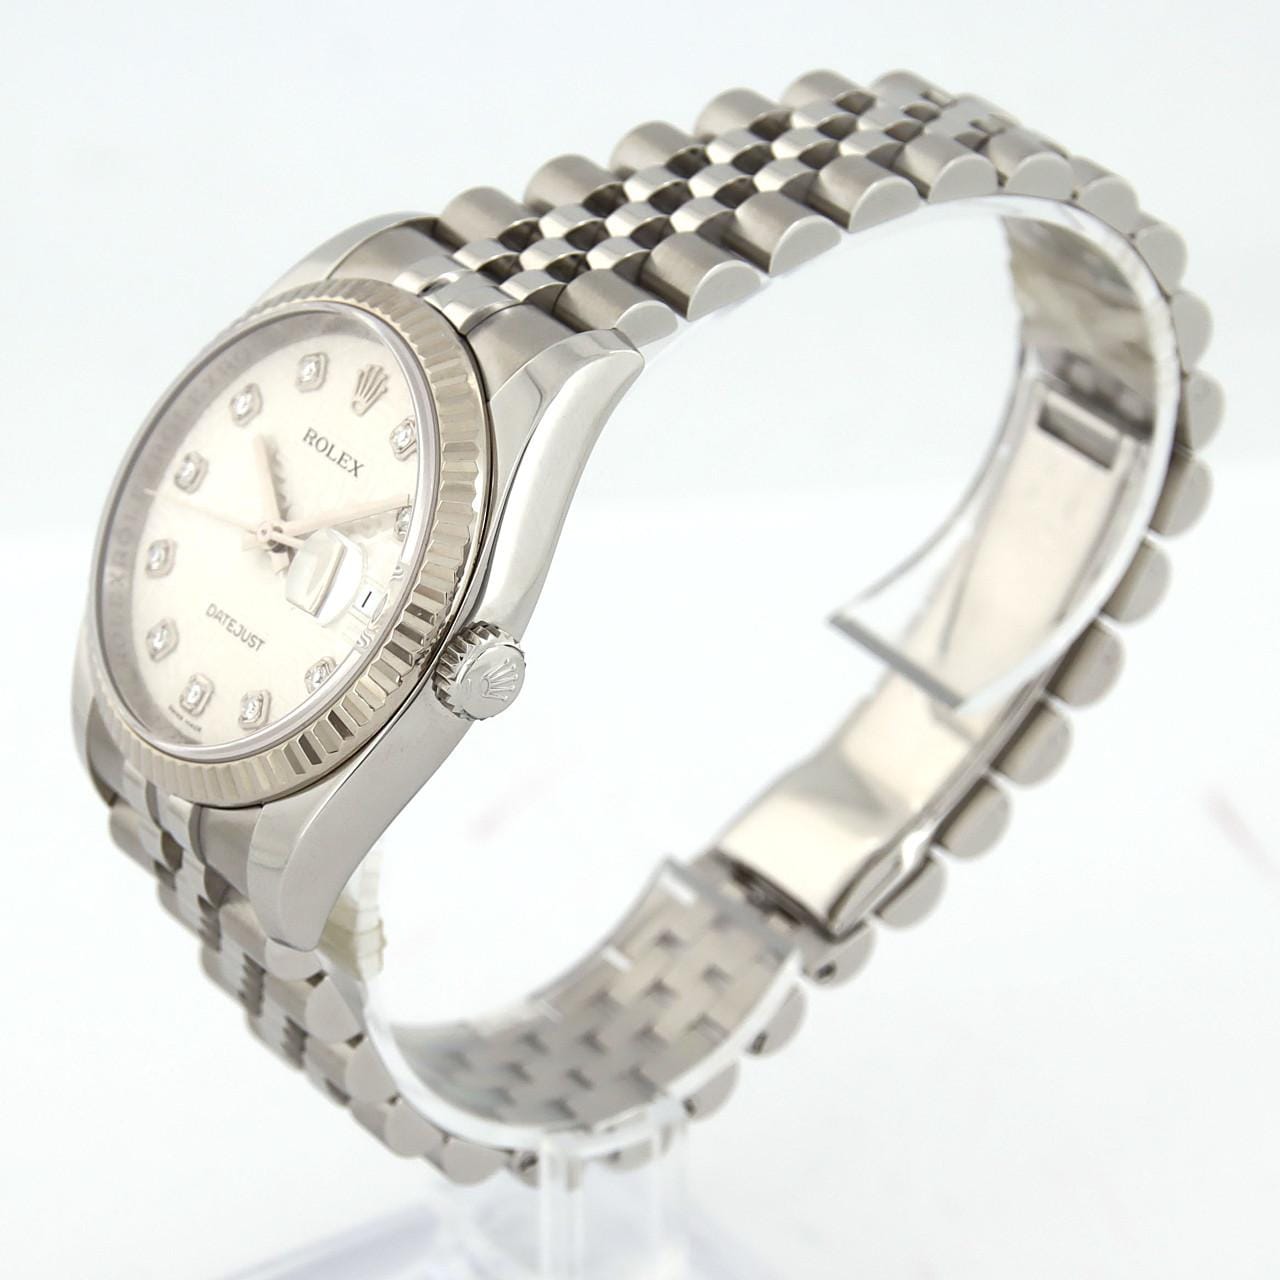 ROLEX Datejust 116234G SSxWG Automatic G number